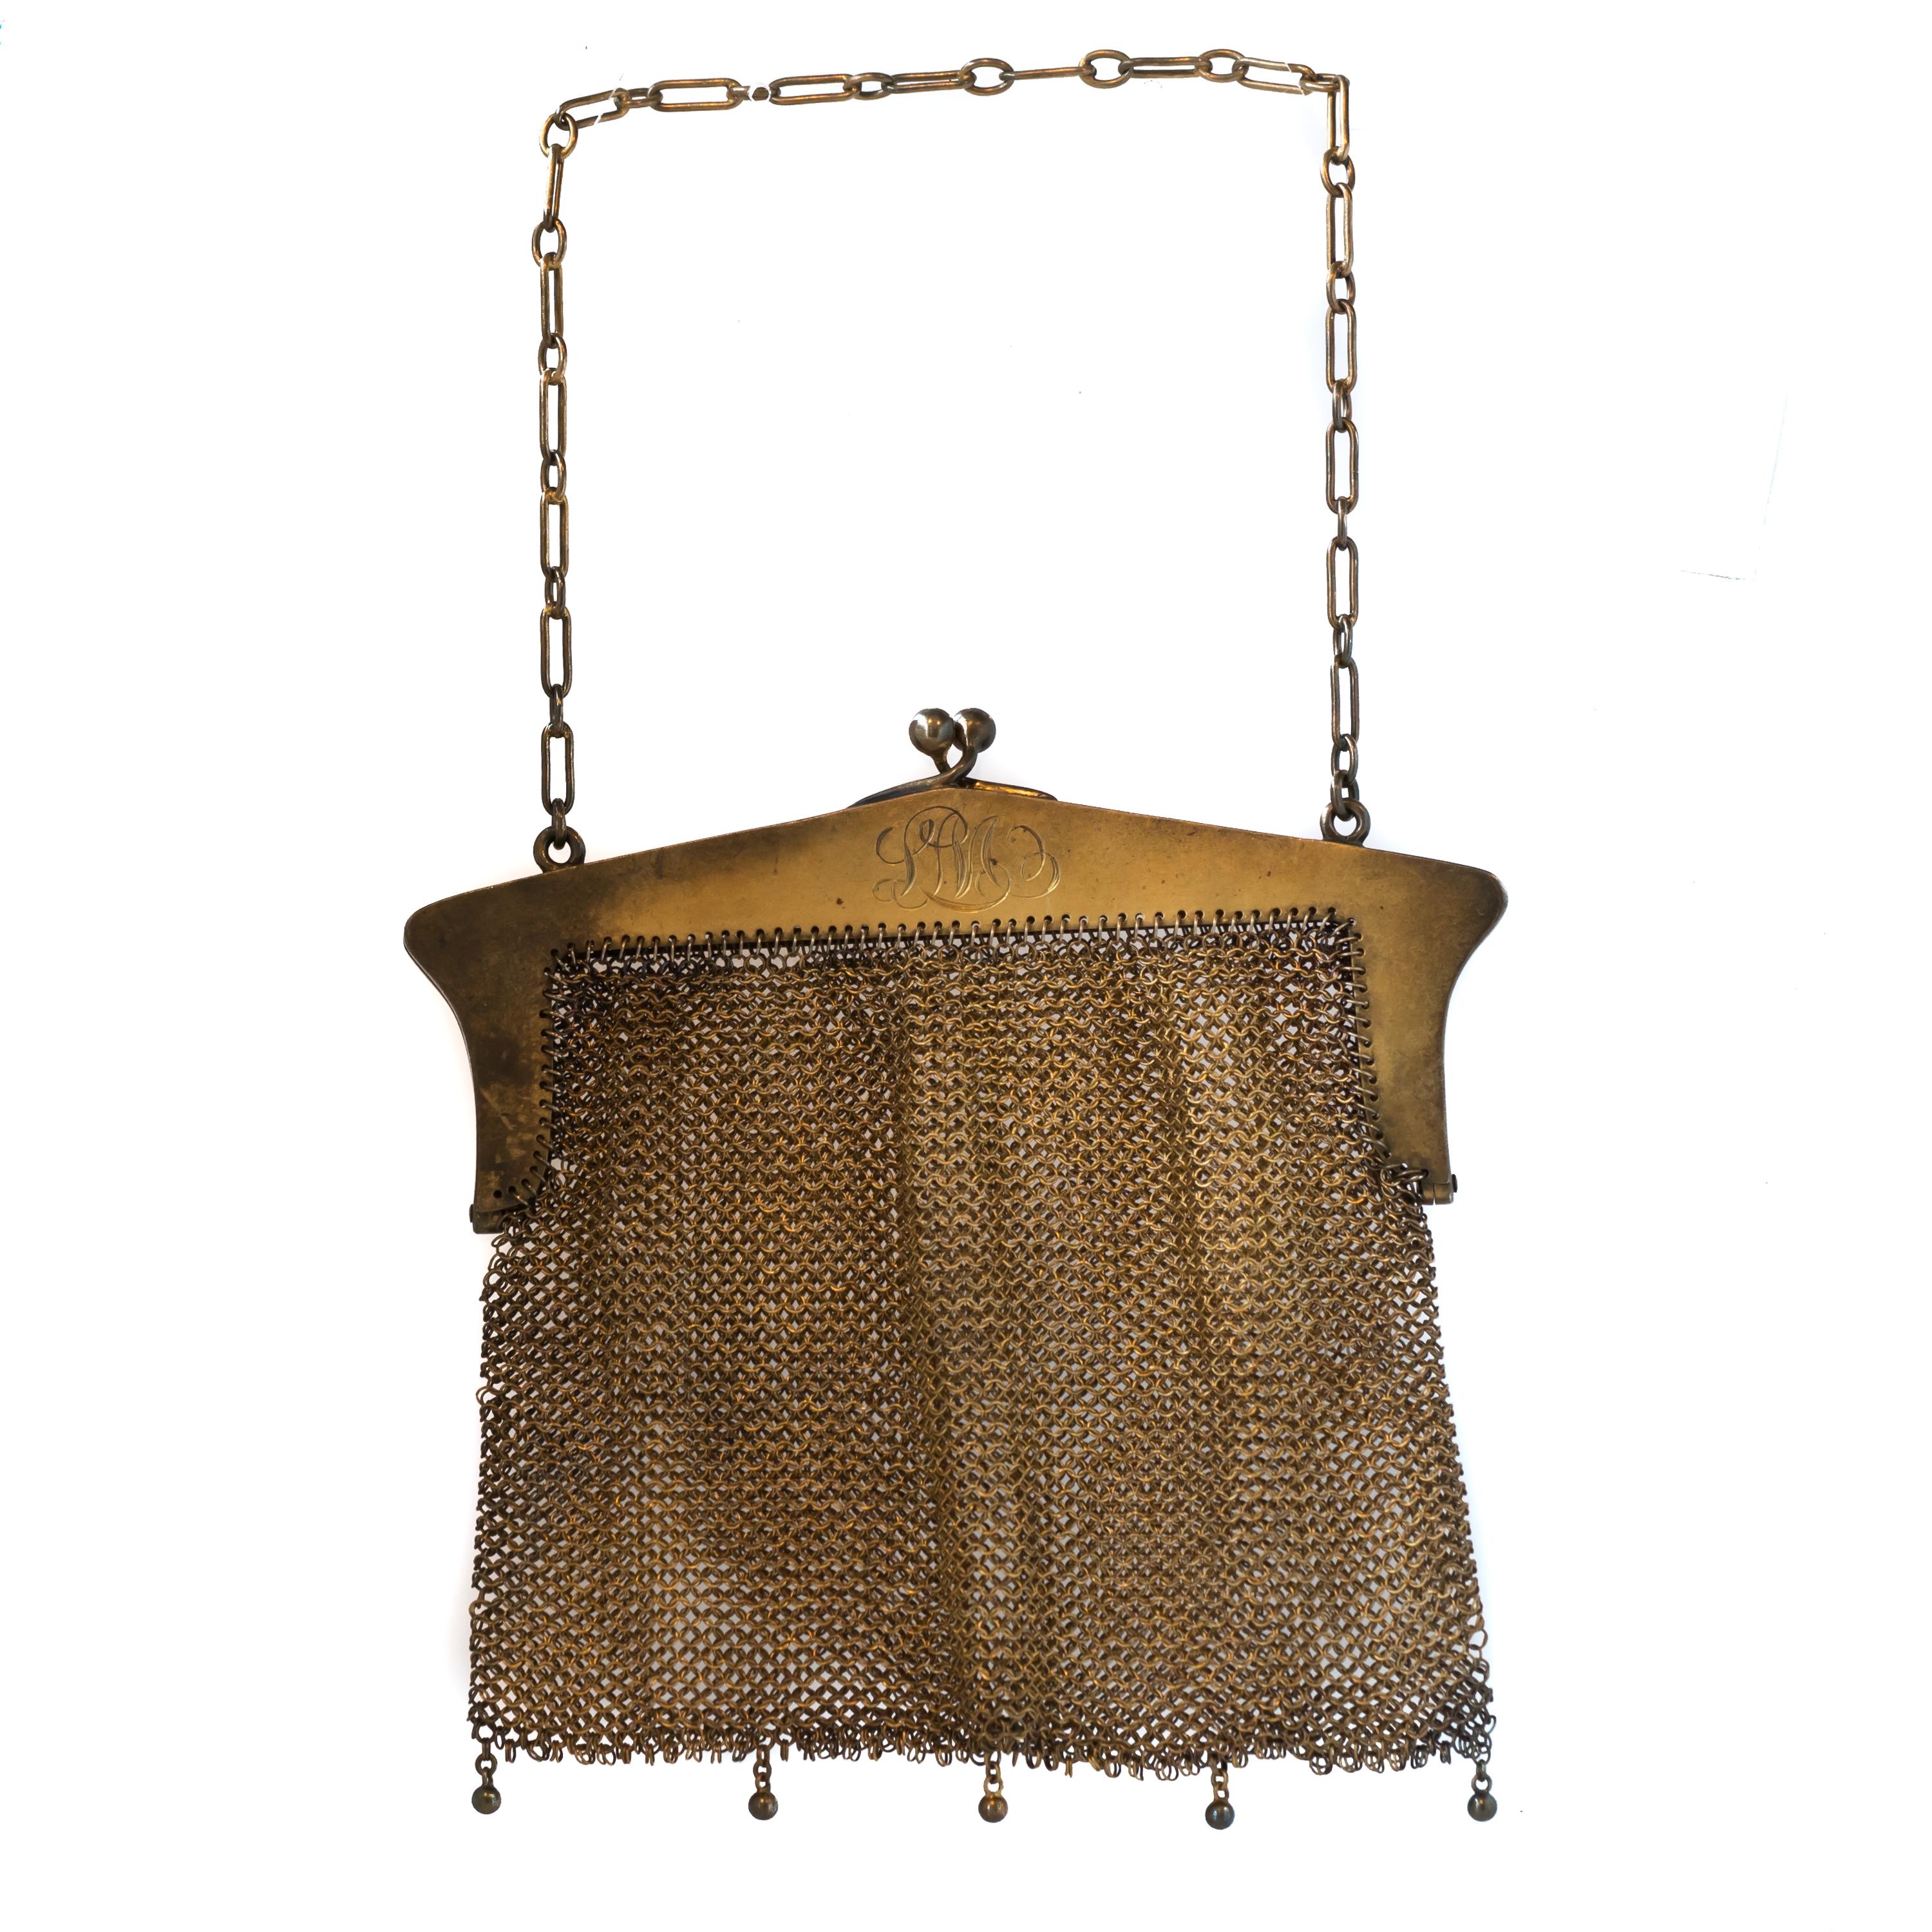 1914 Art Nouveau Mesh Purse - Sterling Silver

Features:
Sterling Silver with Gold Wash, Metal has accumulated heavy visible patina 
Mesh Body with a Floral Design Frame
Link Chain Top Handle and 5-Bead Fringe Bottom 
Hinged Opening
Inner Frame is